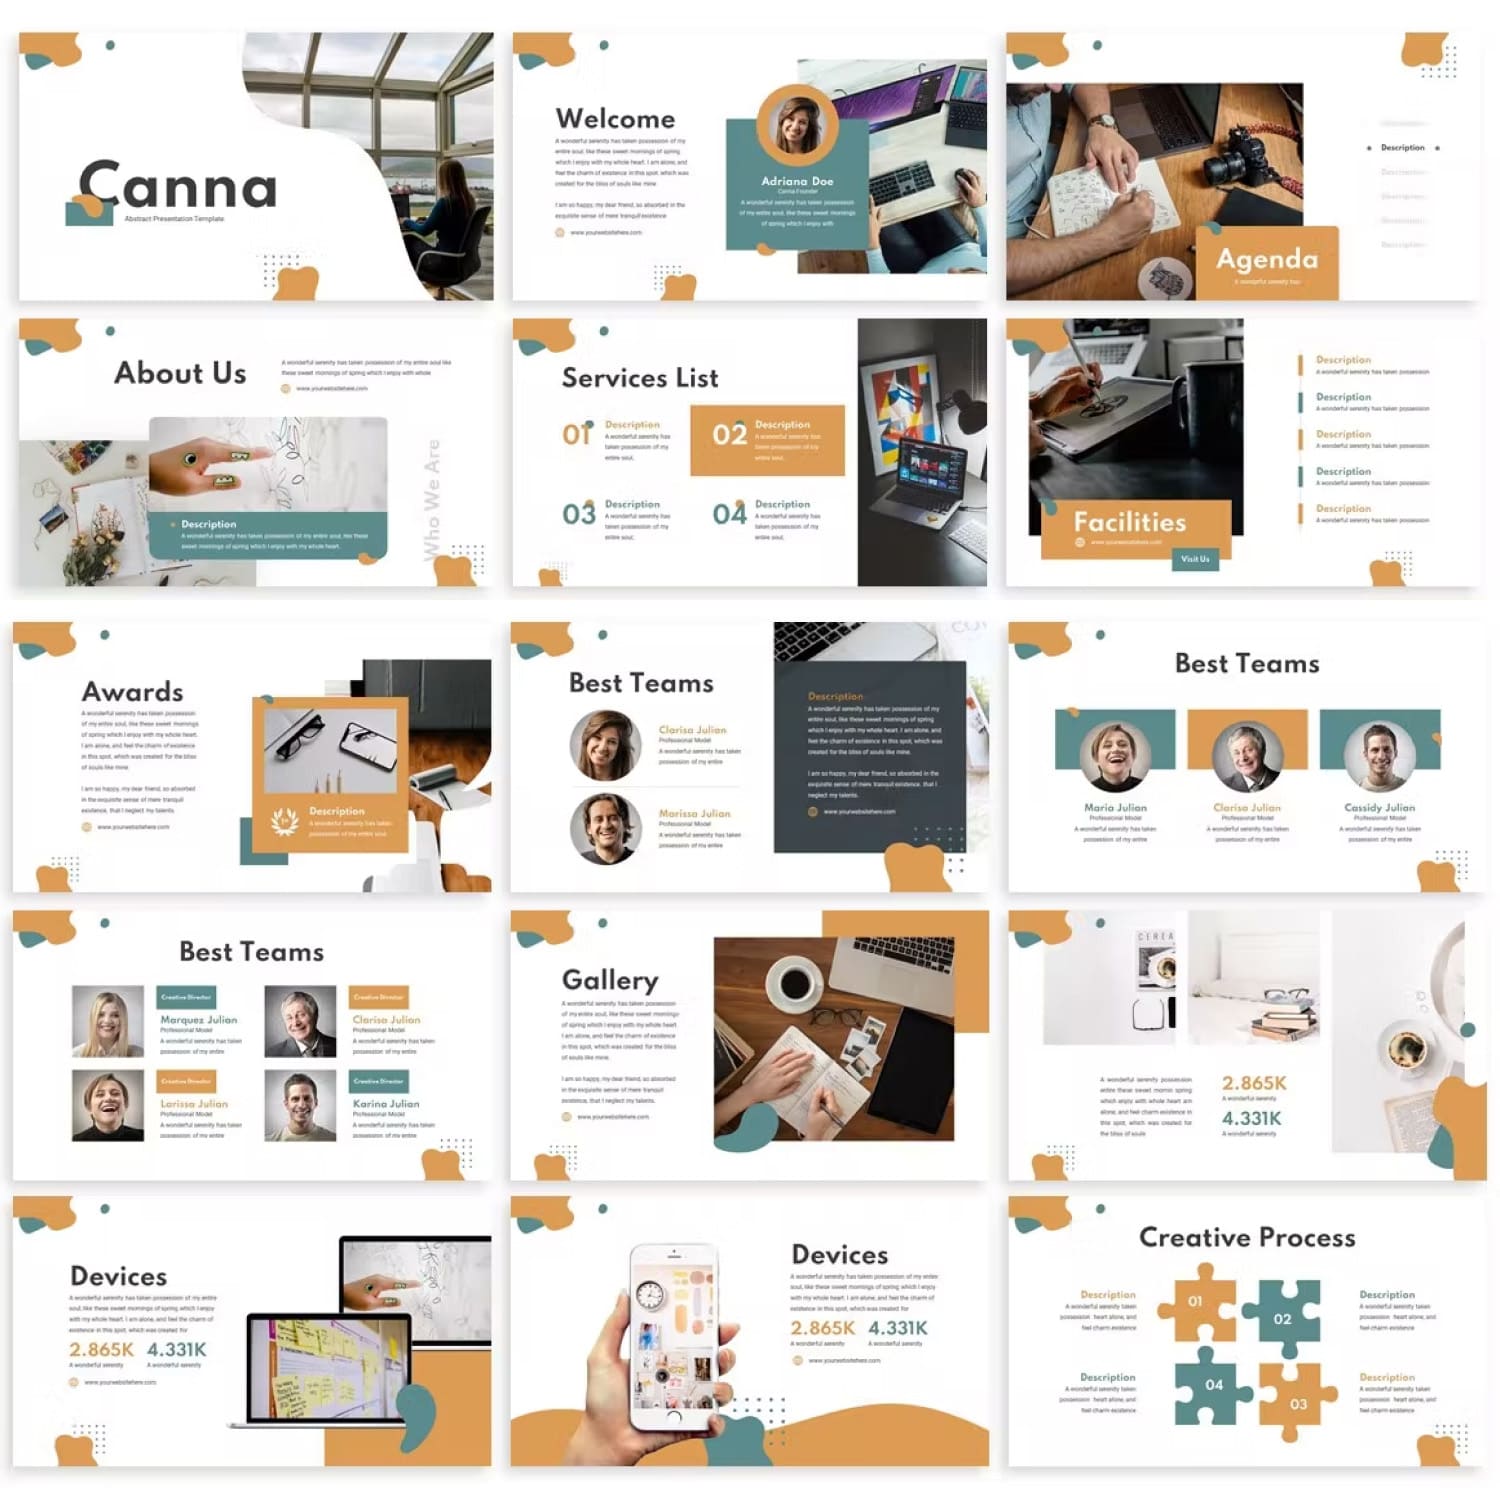 Canna abstract powerpoint template from SlideFactory.